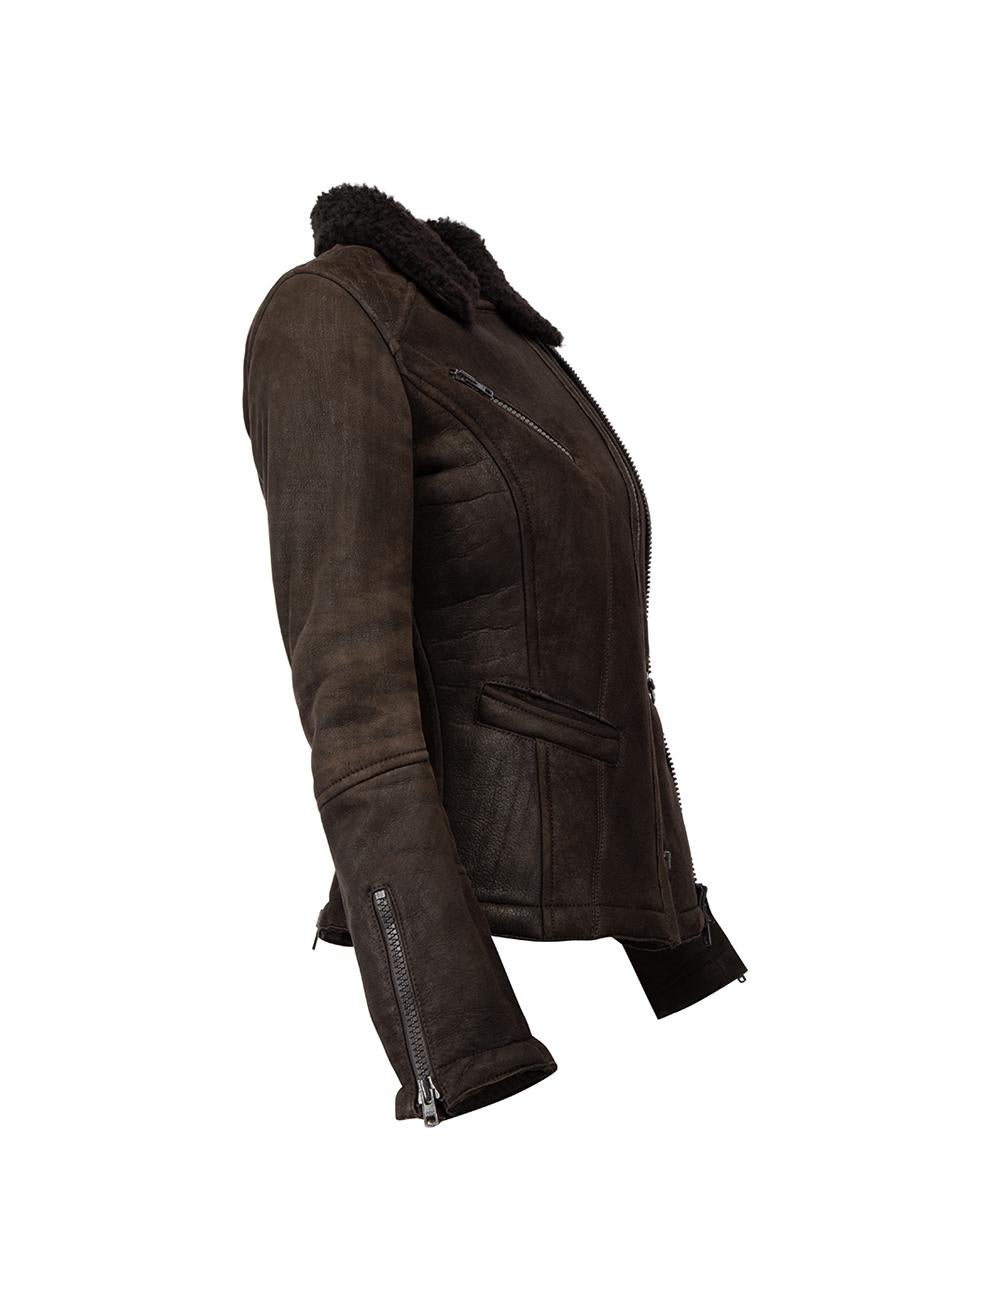 CONDITION is Very good. Minimal wear to jacket is evident. Minimal wear to the outer suede fabric which is worn down, loose thread on sleeves can be seen on this used Gerard Darel designer resale item. Details Brown Suede Zipped cuffs Front